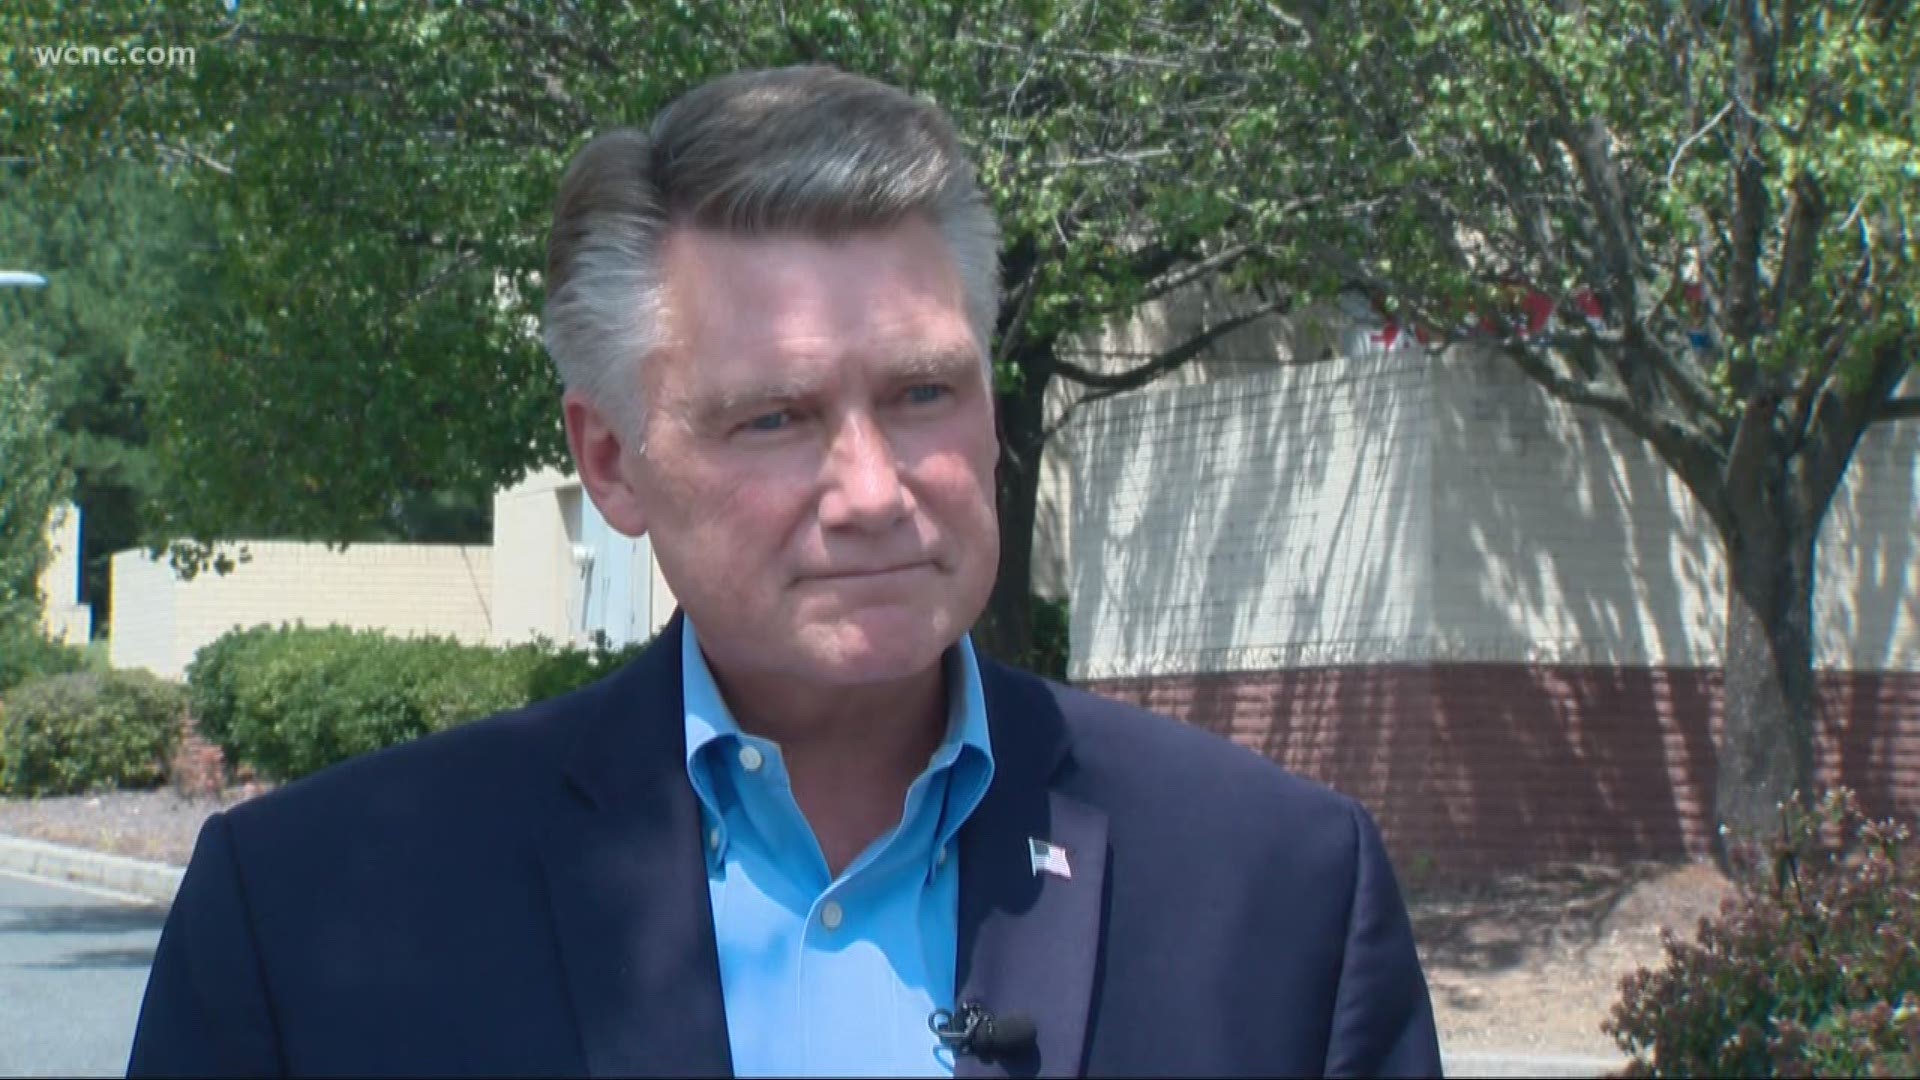 District 9 congressional candidate Mark Harris is getting some major help in his race in the name of President Donald Trump.